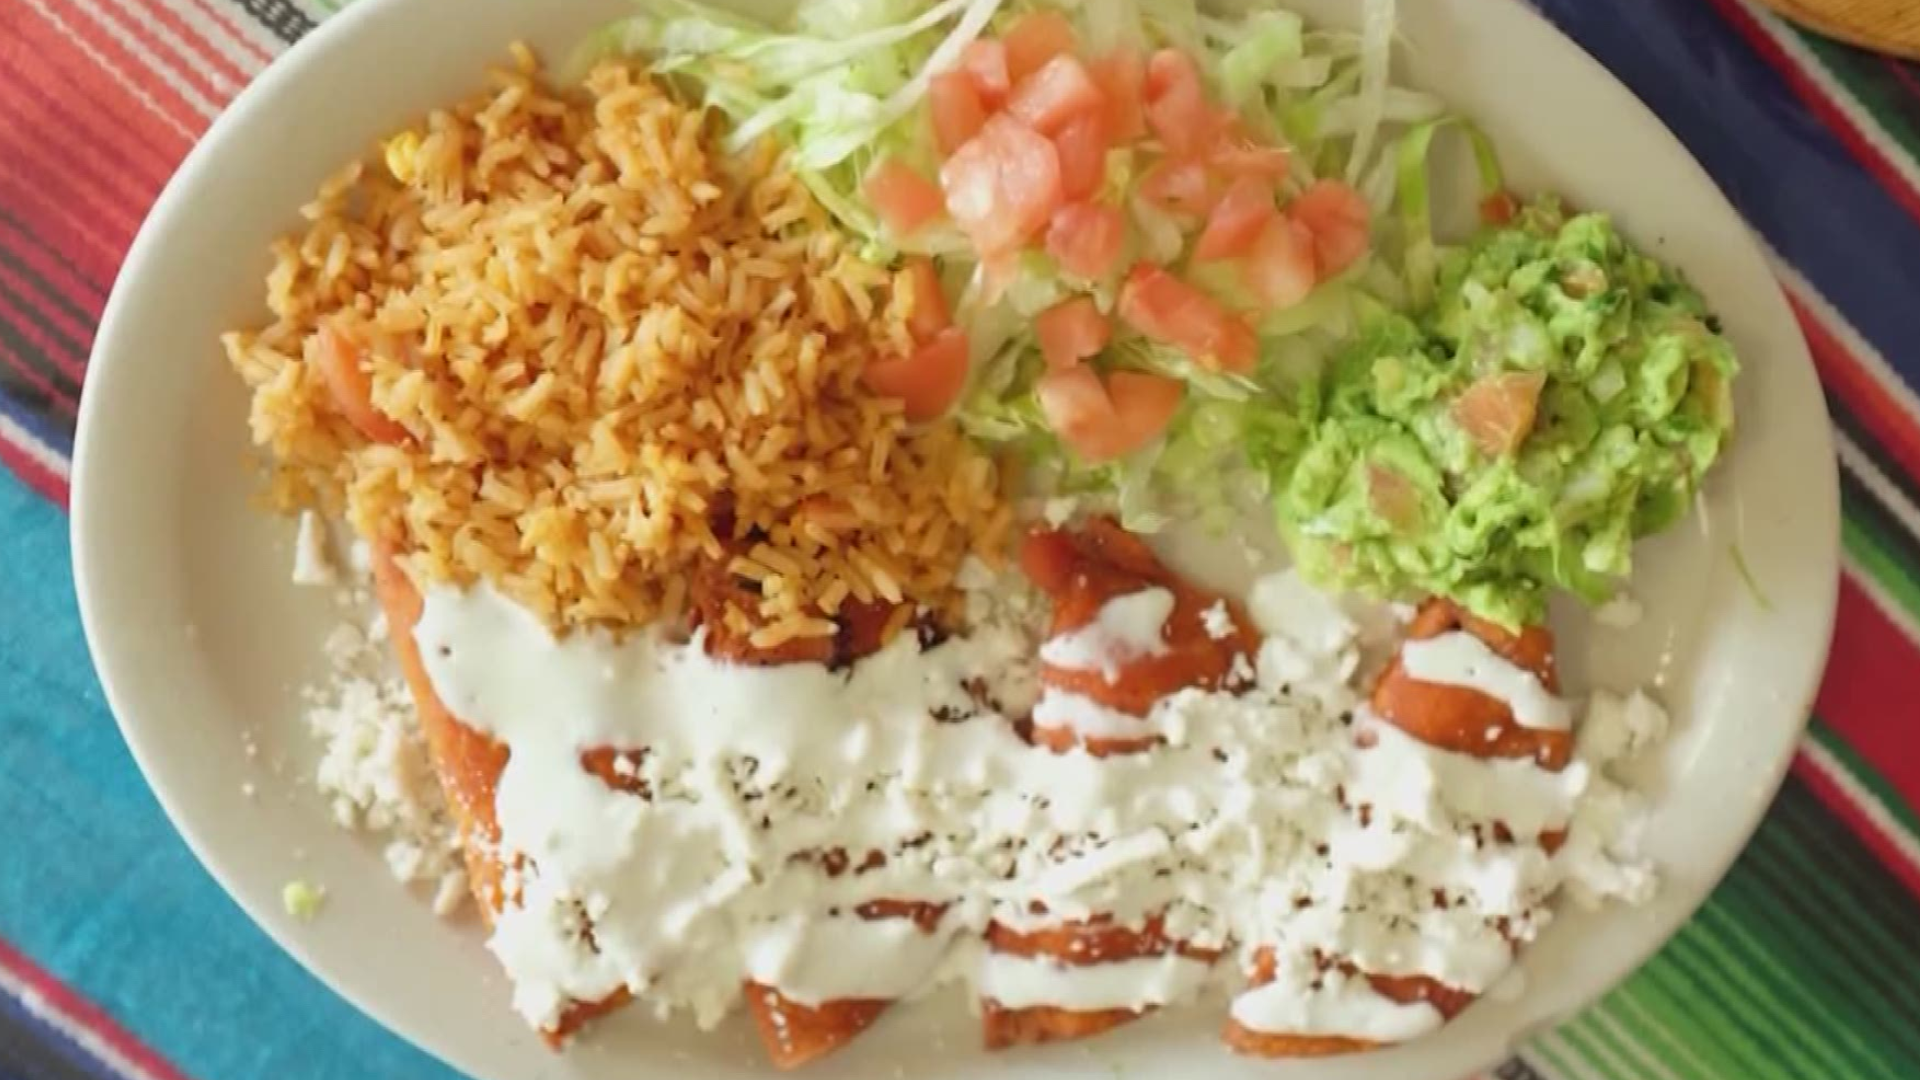 Neighborhood Eats is diving into authentic Mexican food near Leon Valley. Marvin Hurst sat down at the Amiga Cafe for a taste test.